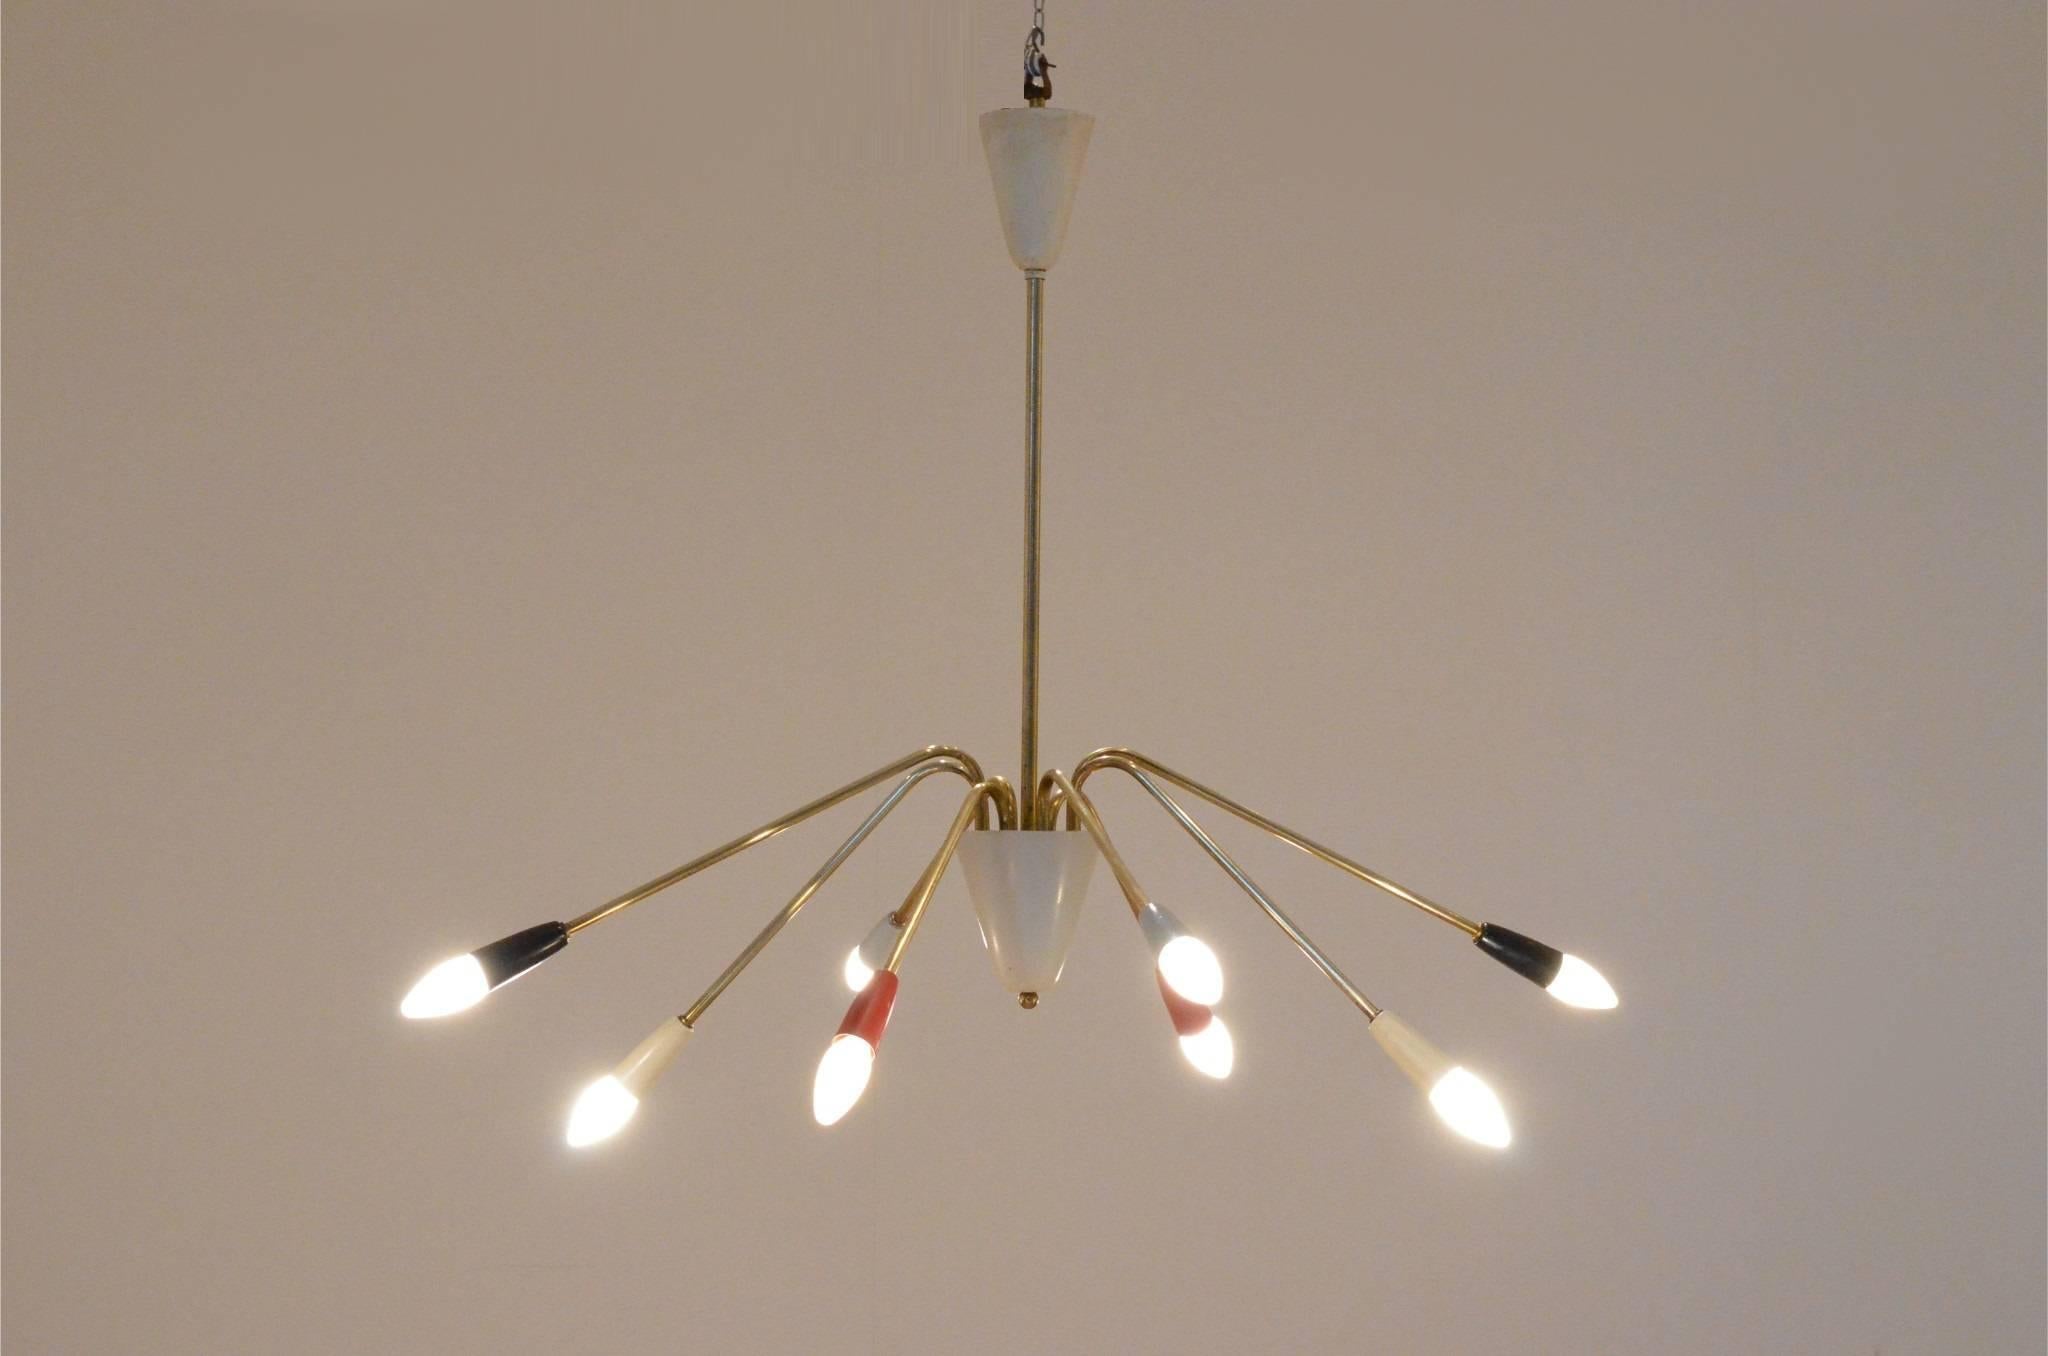 Highly decorative Mid-Century Italian chandelier, most probably manufactured by Arteluce. Quadricolor painted metal endings matching brass arms.